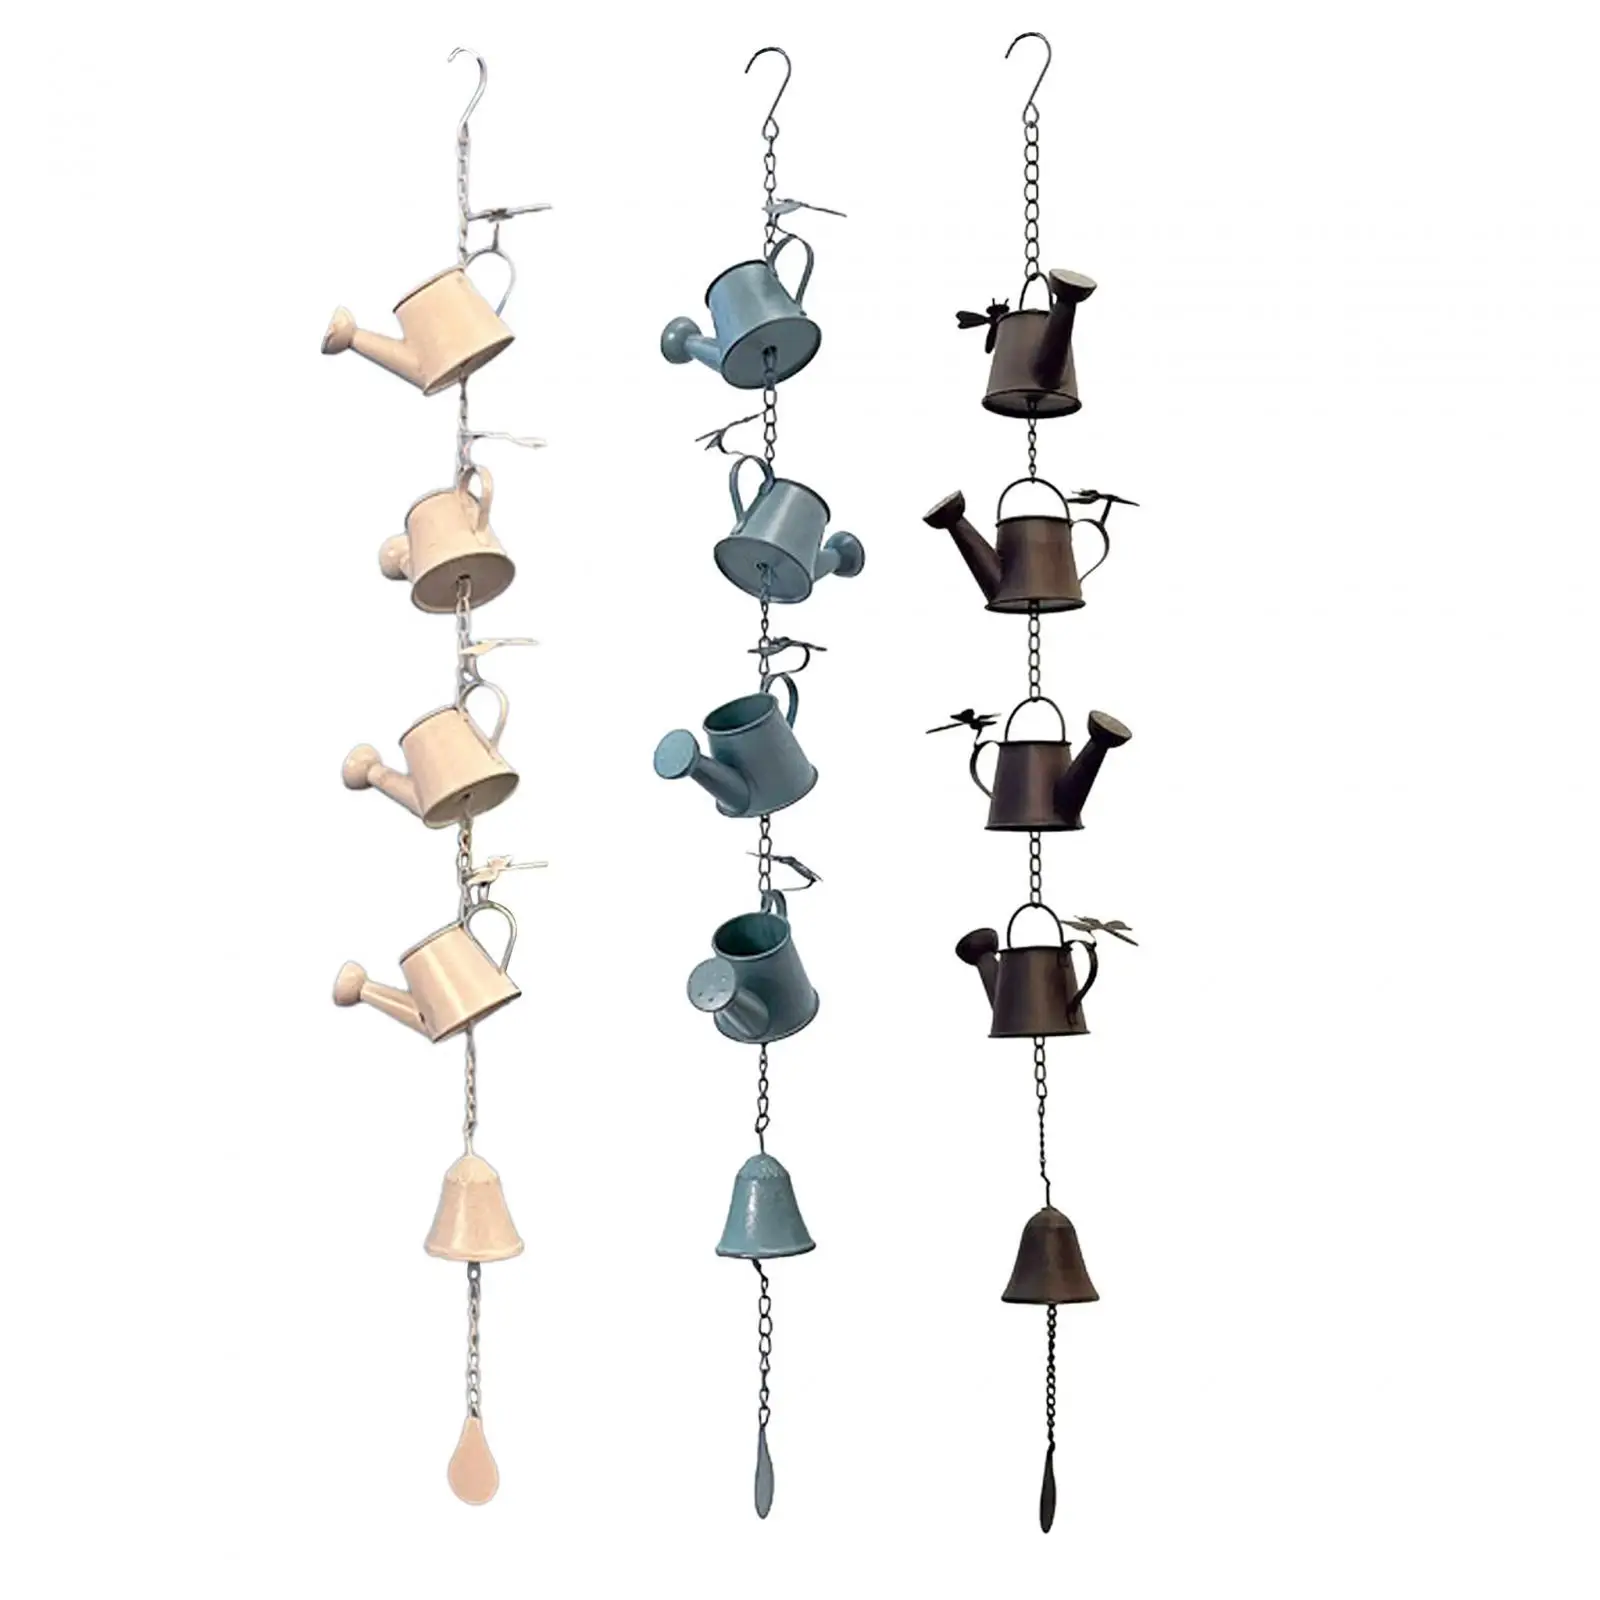 

Watering Can Bell Rustic Metal Rain Chains 107cm Decorative Hanging Display for Replacement Downspout Multipurpose Exquisite